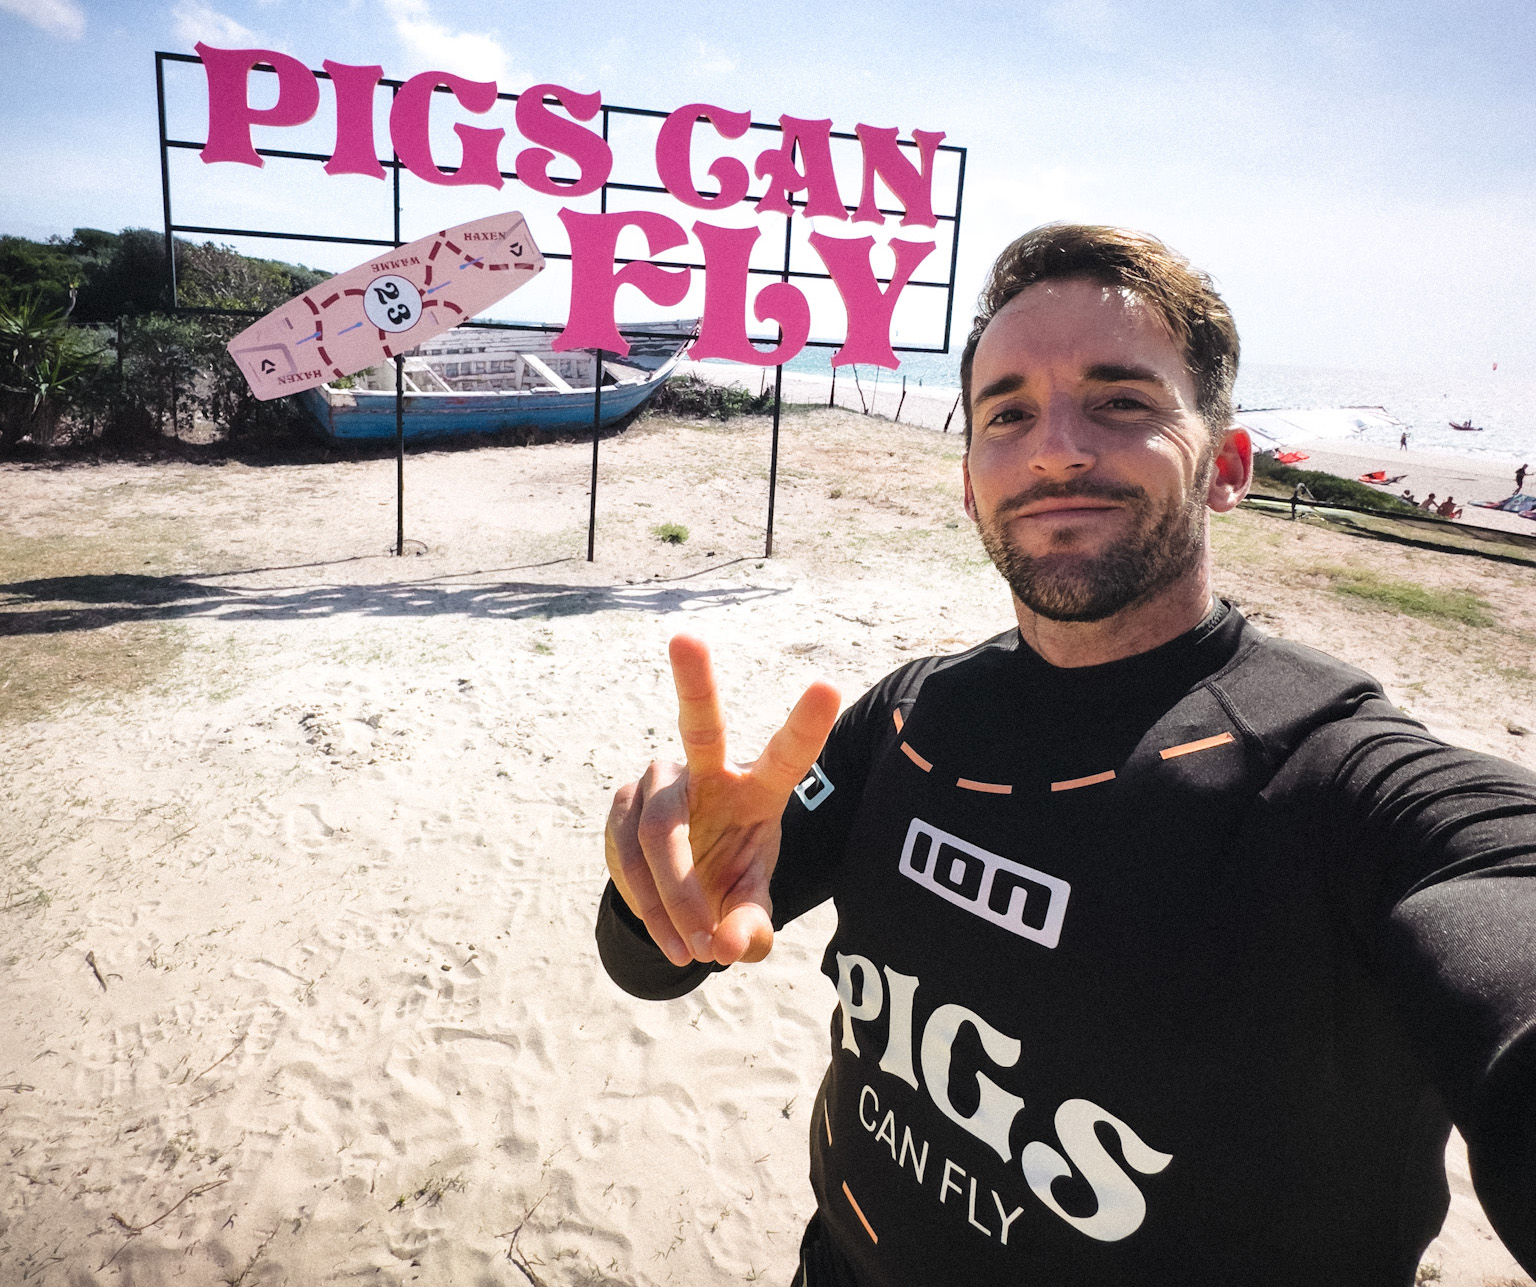 Man wearing wetsuit shoots victory sign on beach